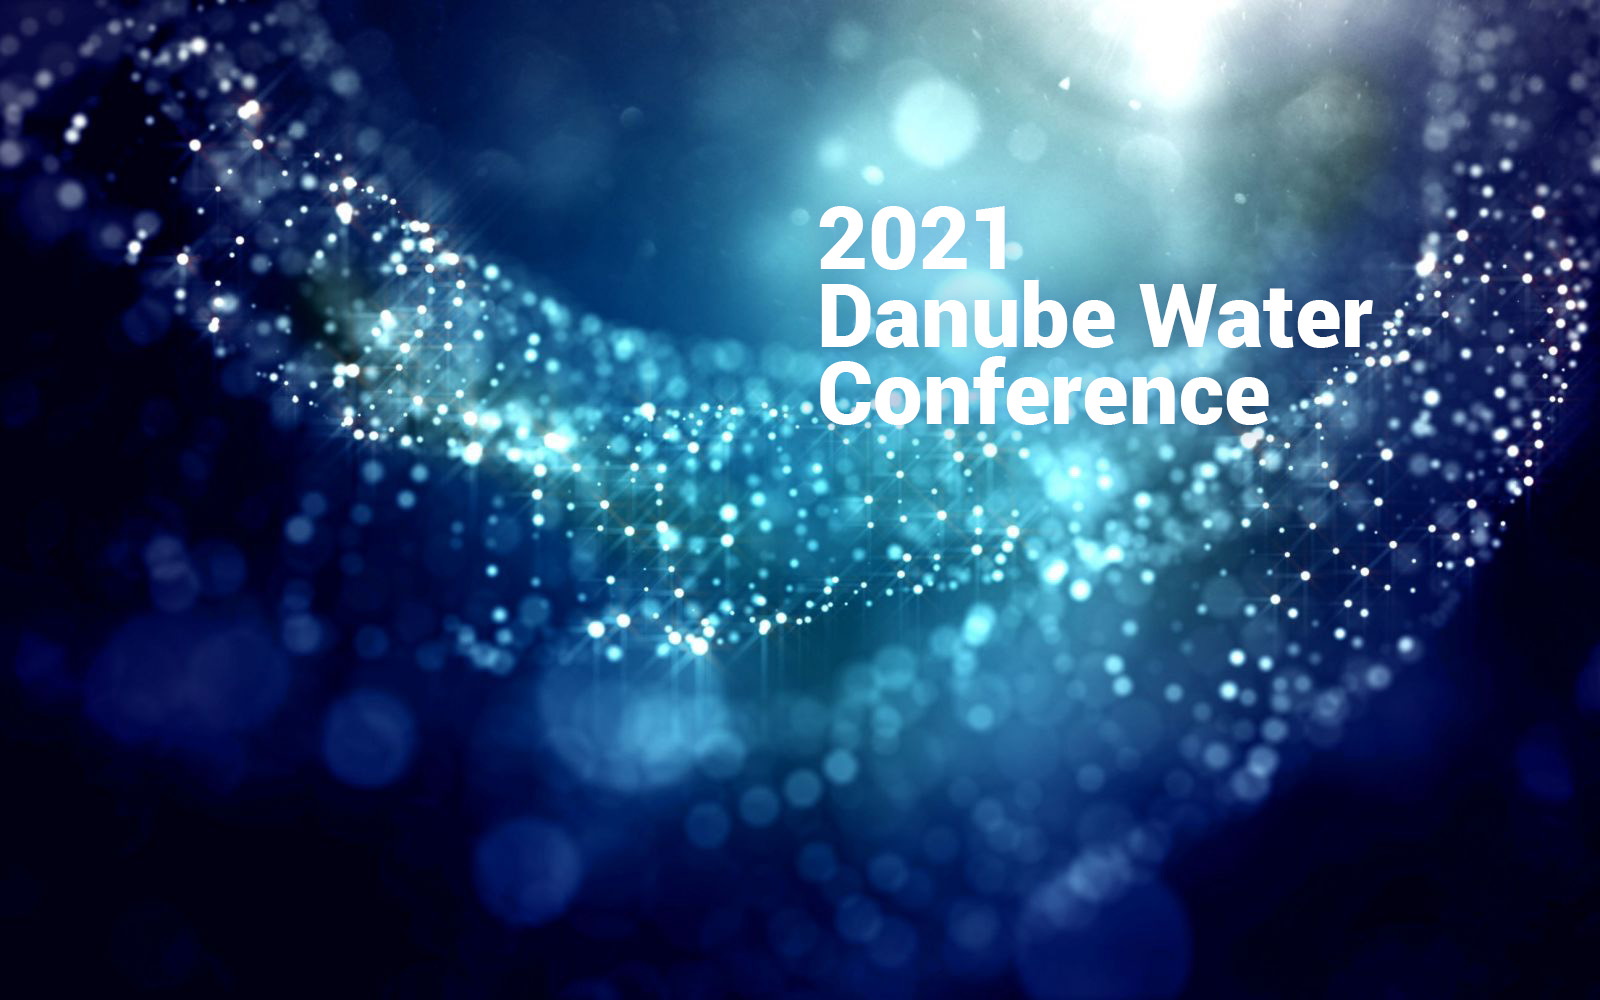 2021 Danube Water Conference: You are Welcome to Register now!